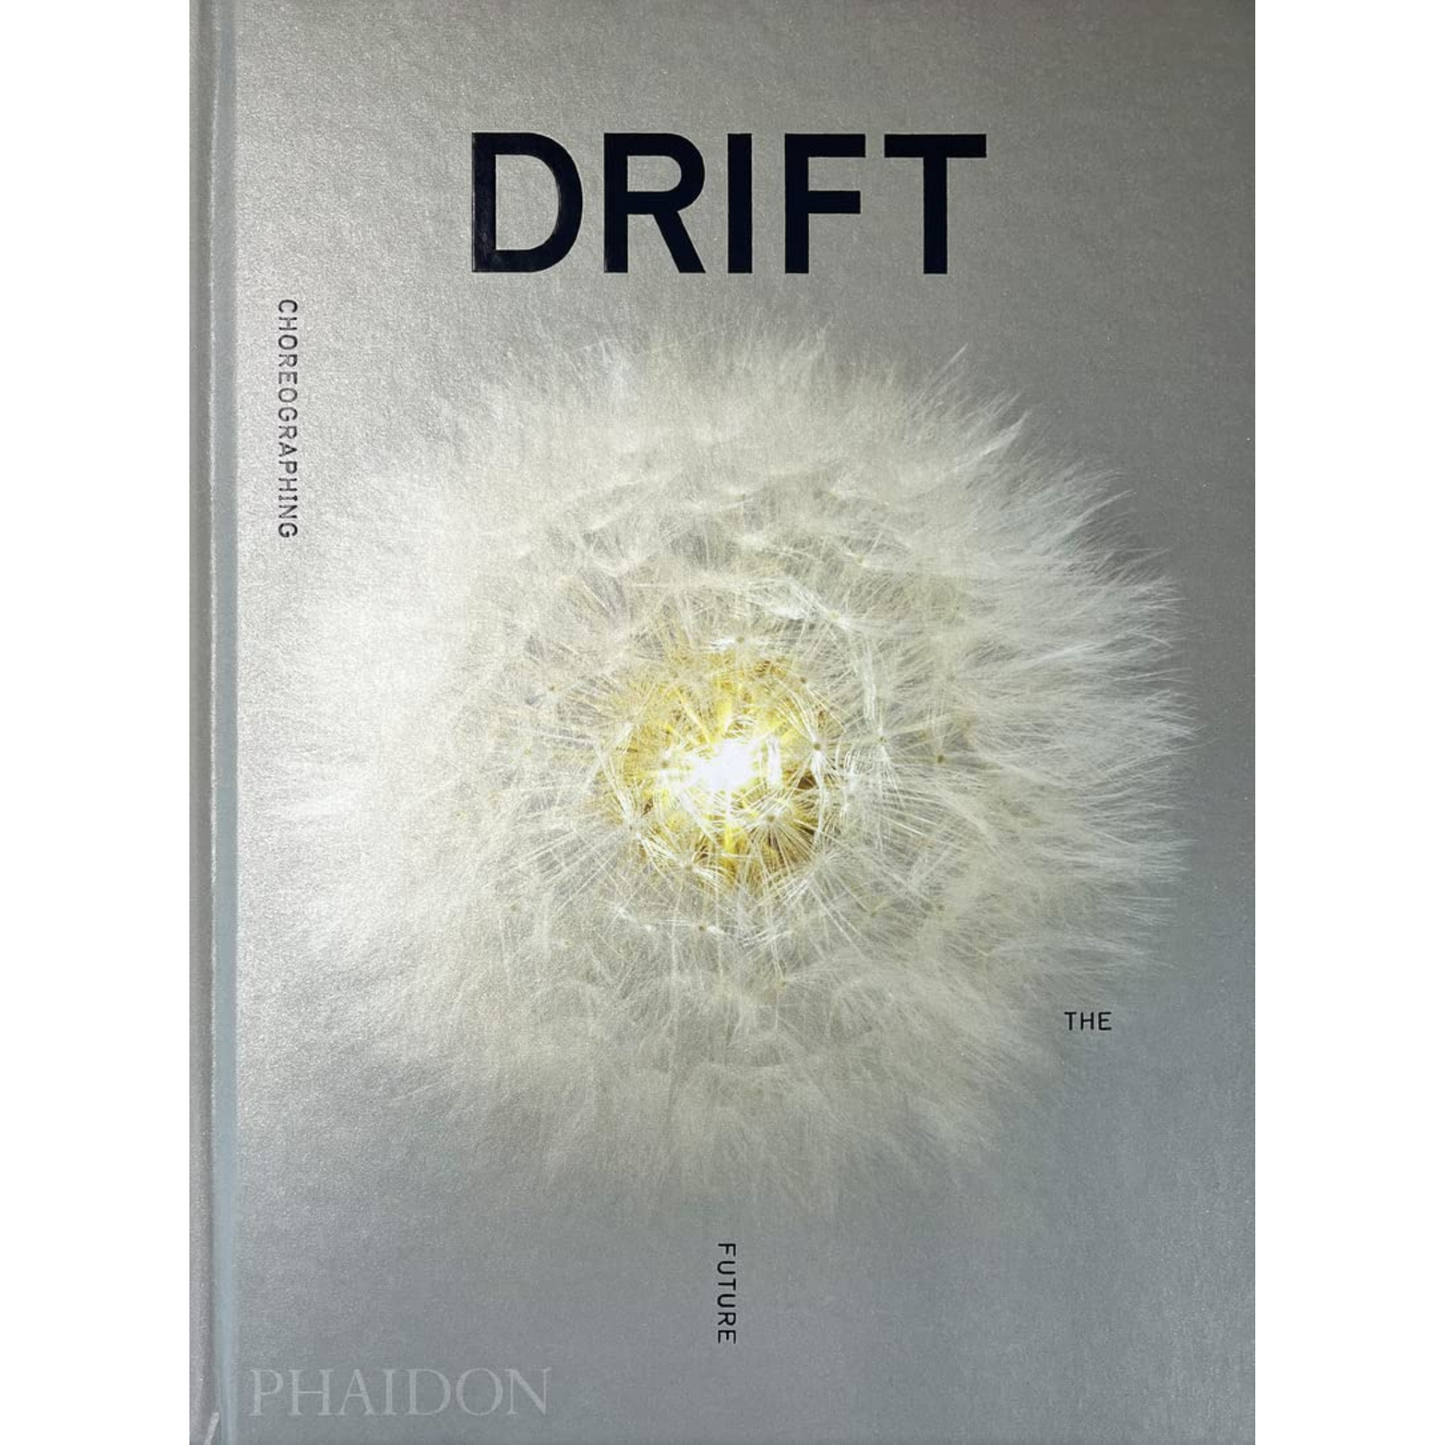 Cover of DRIFT with close up of dandelion.